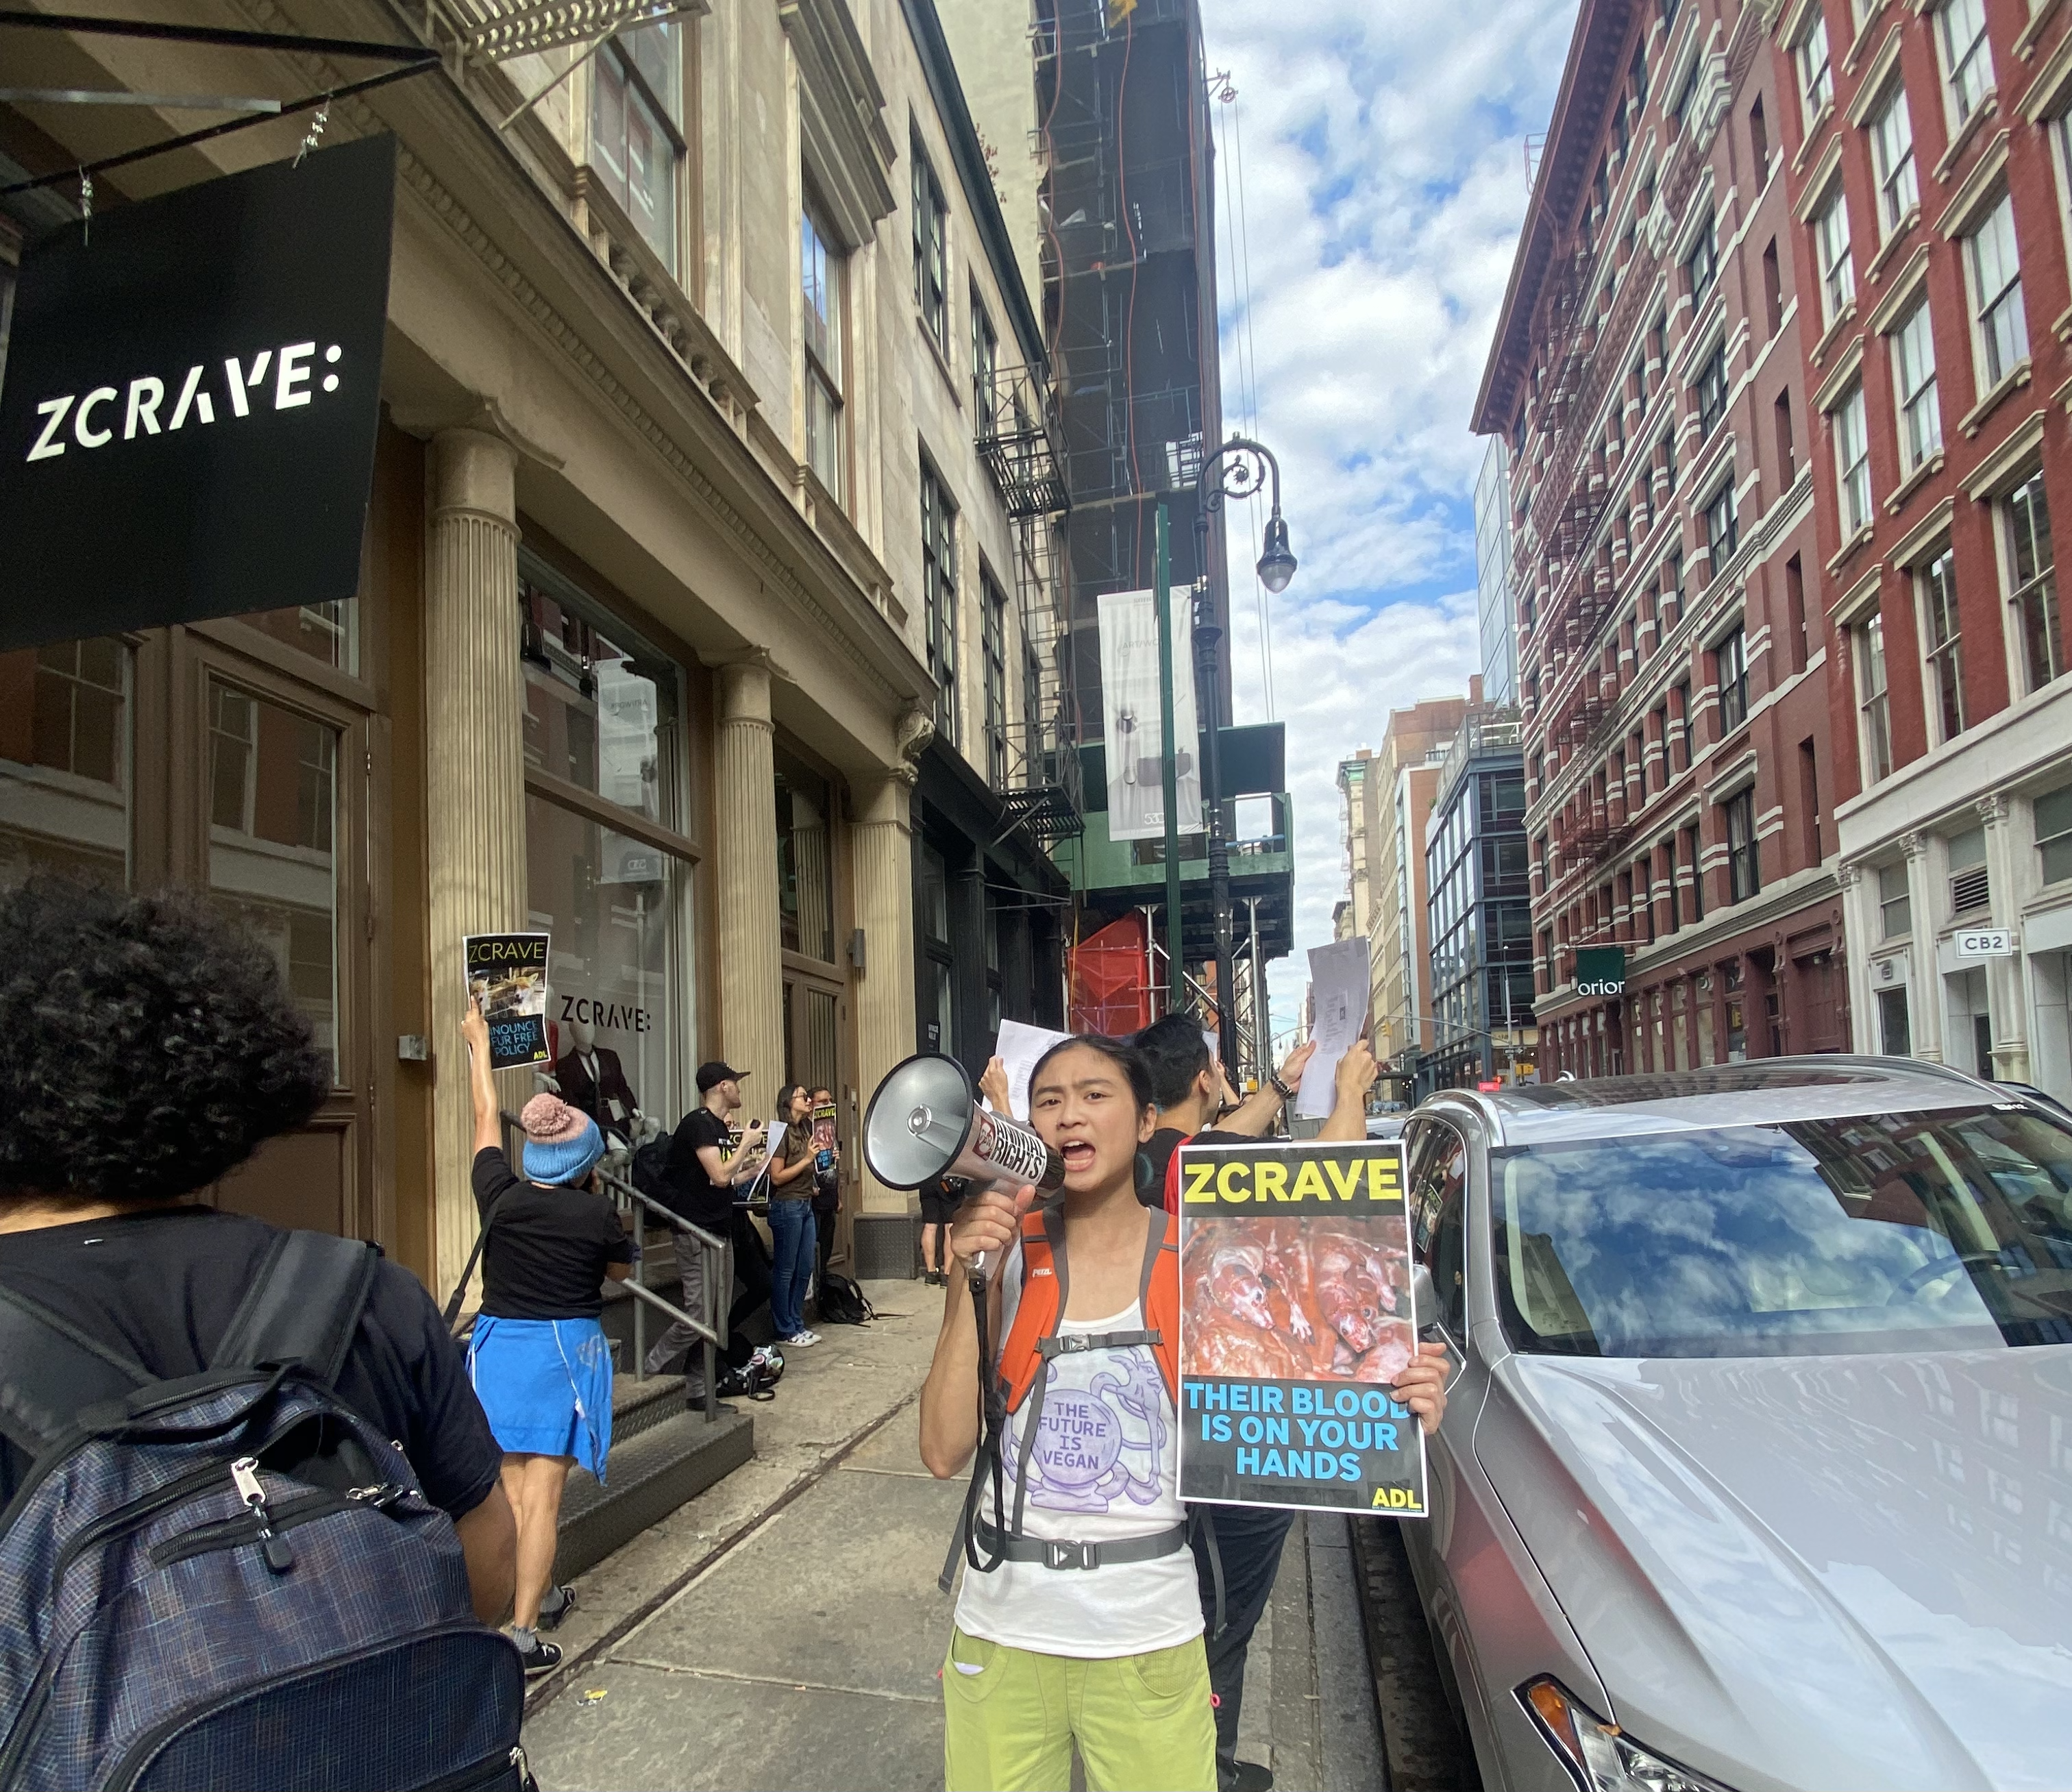 Activists protesting the ZCRAVE storefront